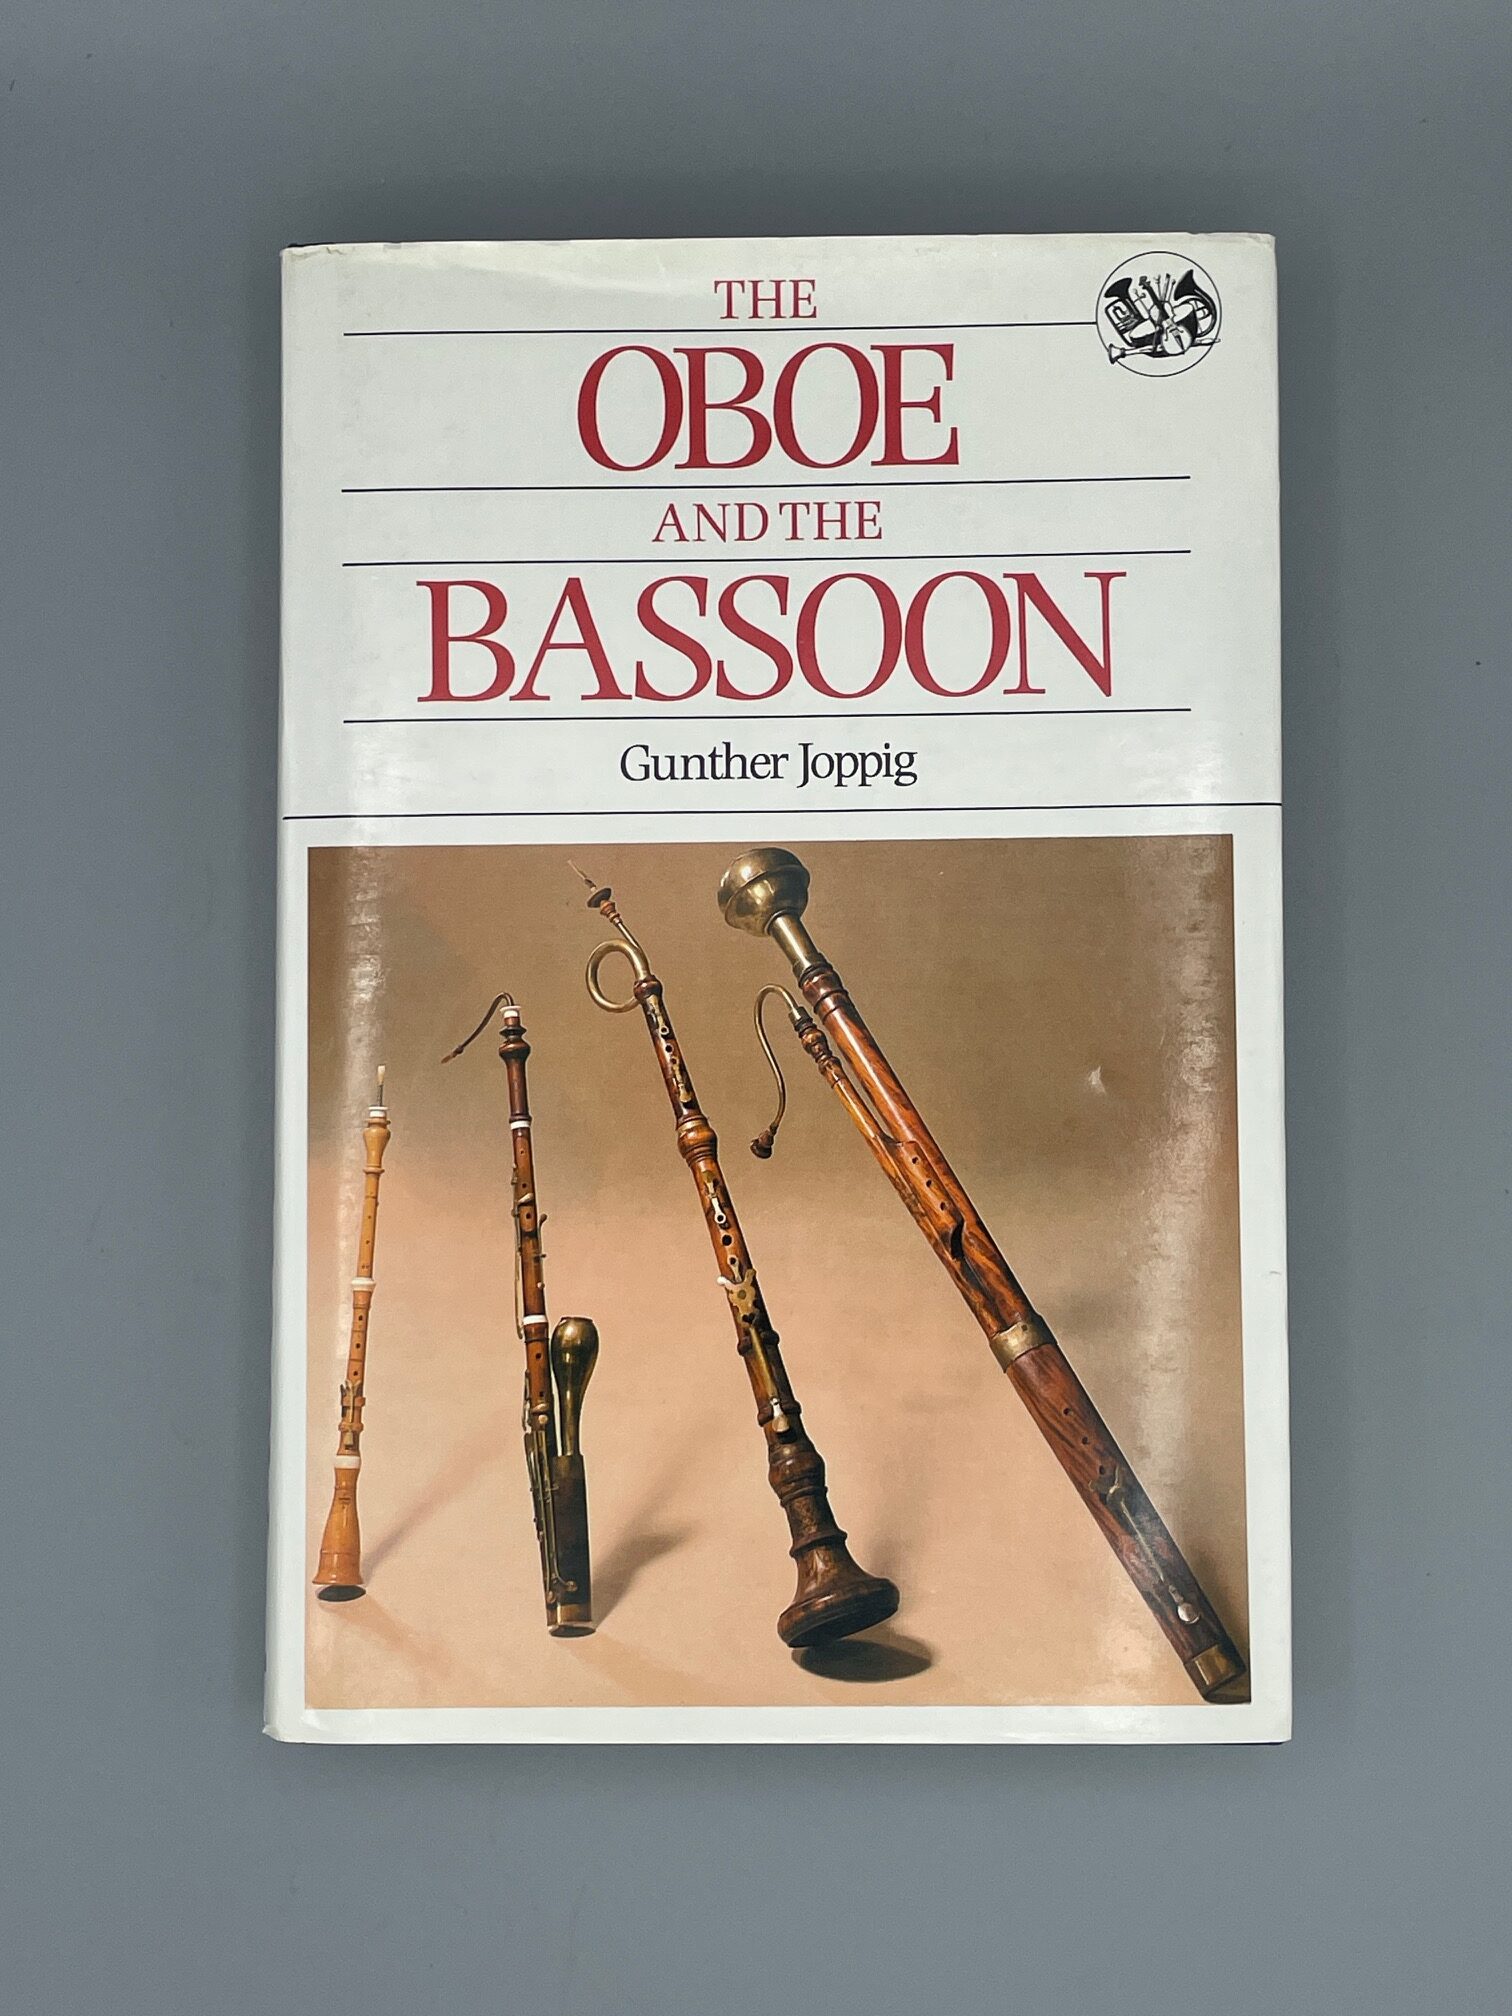 Used-book-Oboe-and-the-Bassoon-Gunther-Joppig-vm-collectables-1